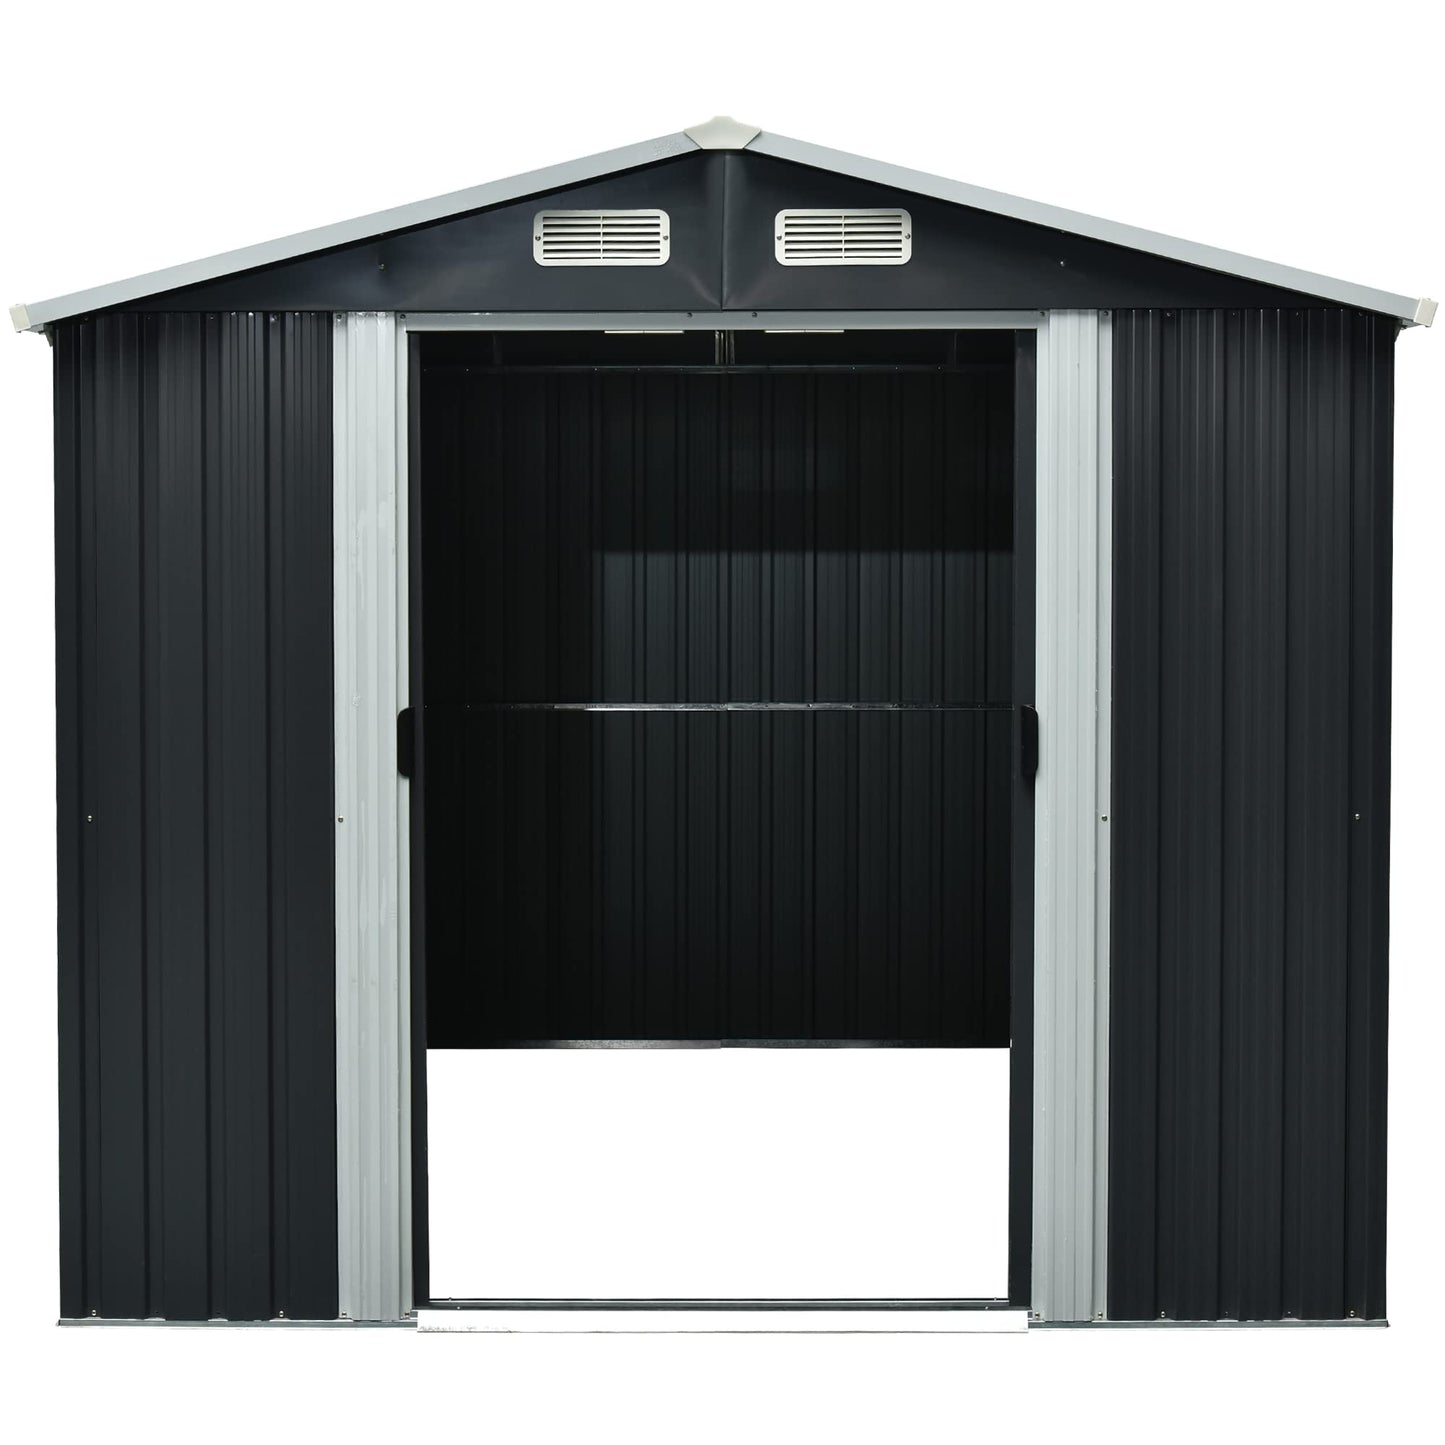 Chery Industrial 8x9FT Shed Outdoor Storage Shed, Galvanized Garden Shed with Air Vent and Slide Door, Tool Storage Backyard Shed,Tiny House Garden Tool Storage for Backyard Patio Lawn(Black)